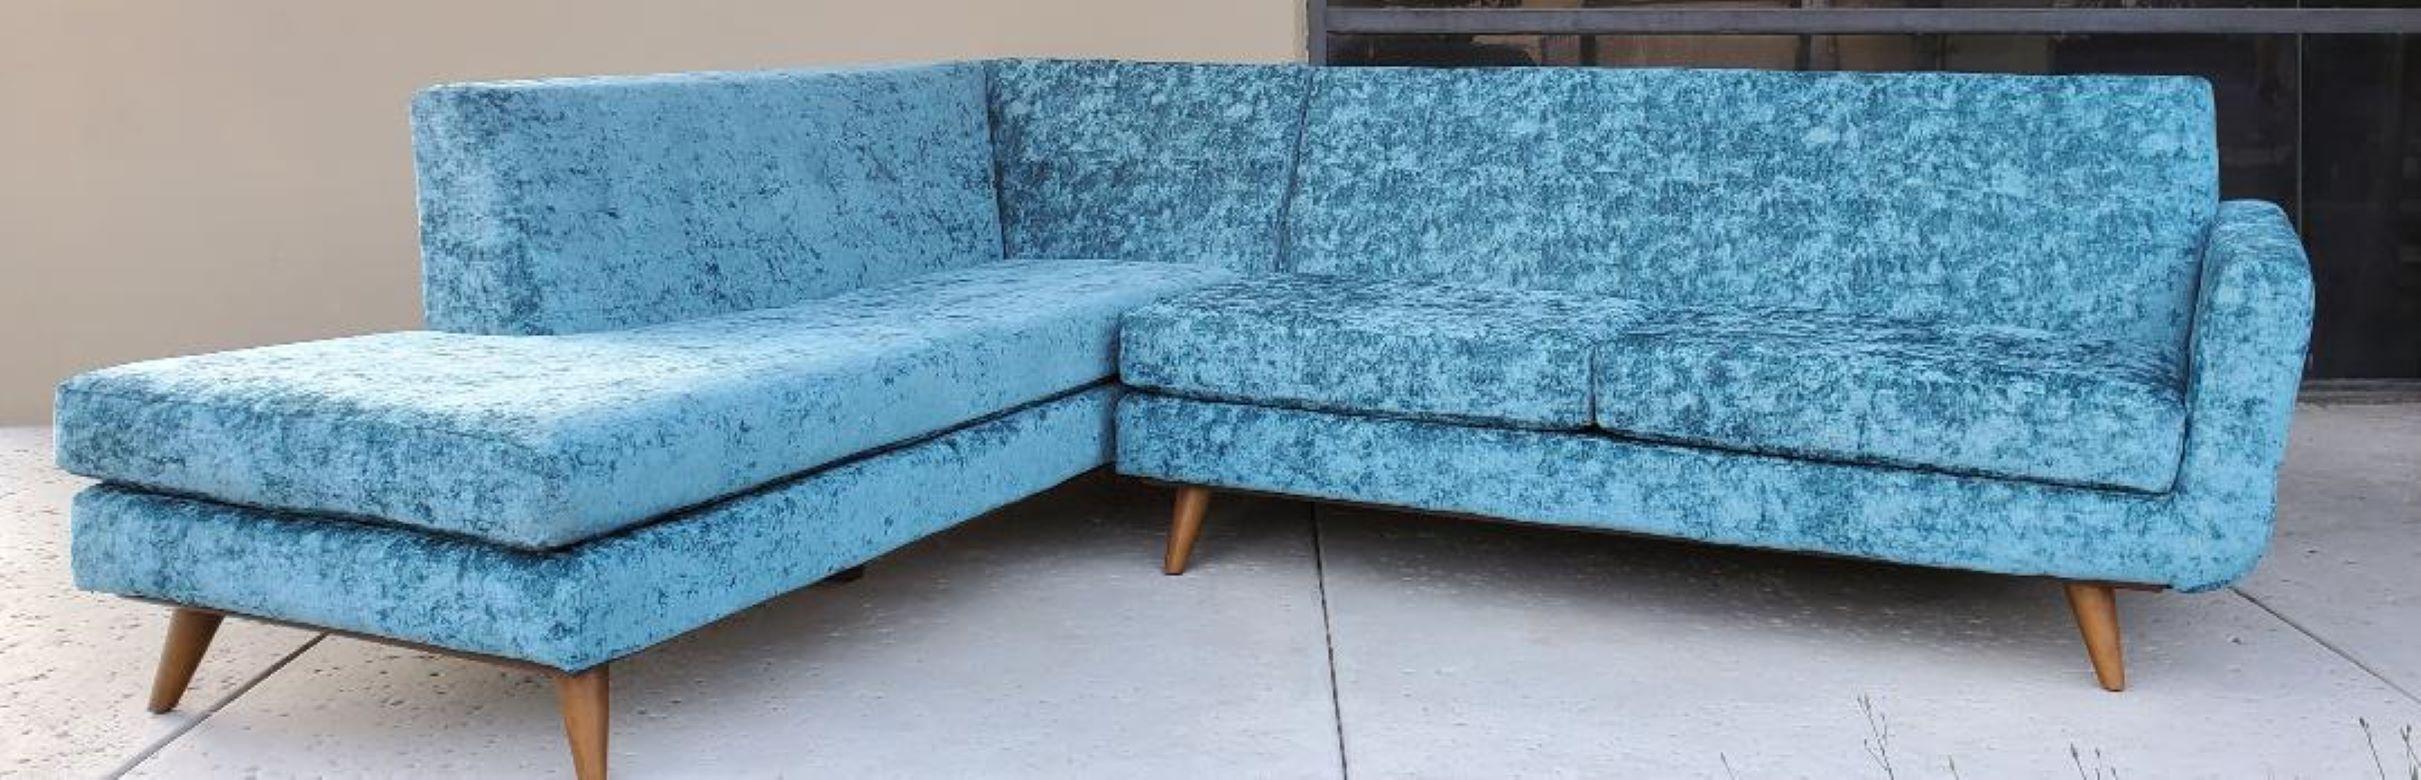 60s Low Slung Style Sectional Tapered Legs Aqua Green Crushed Velvet Upholstery For Sale 4